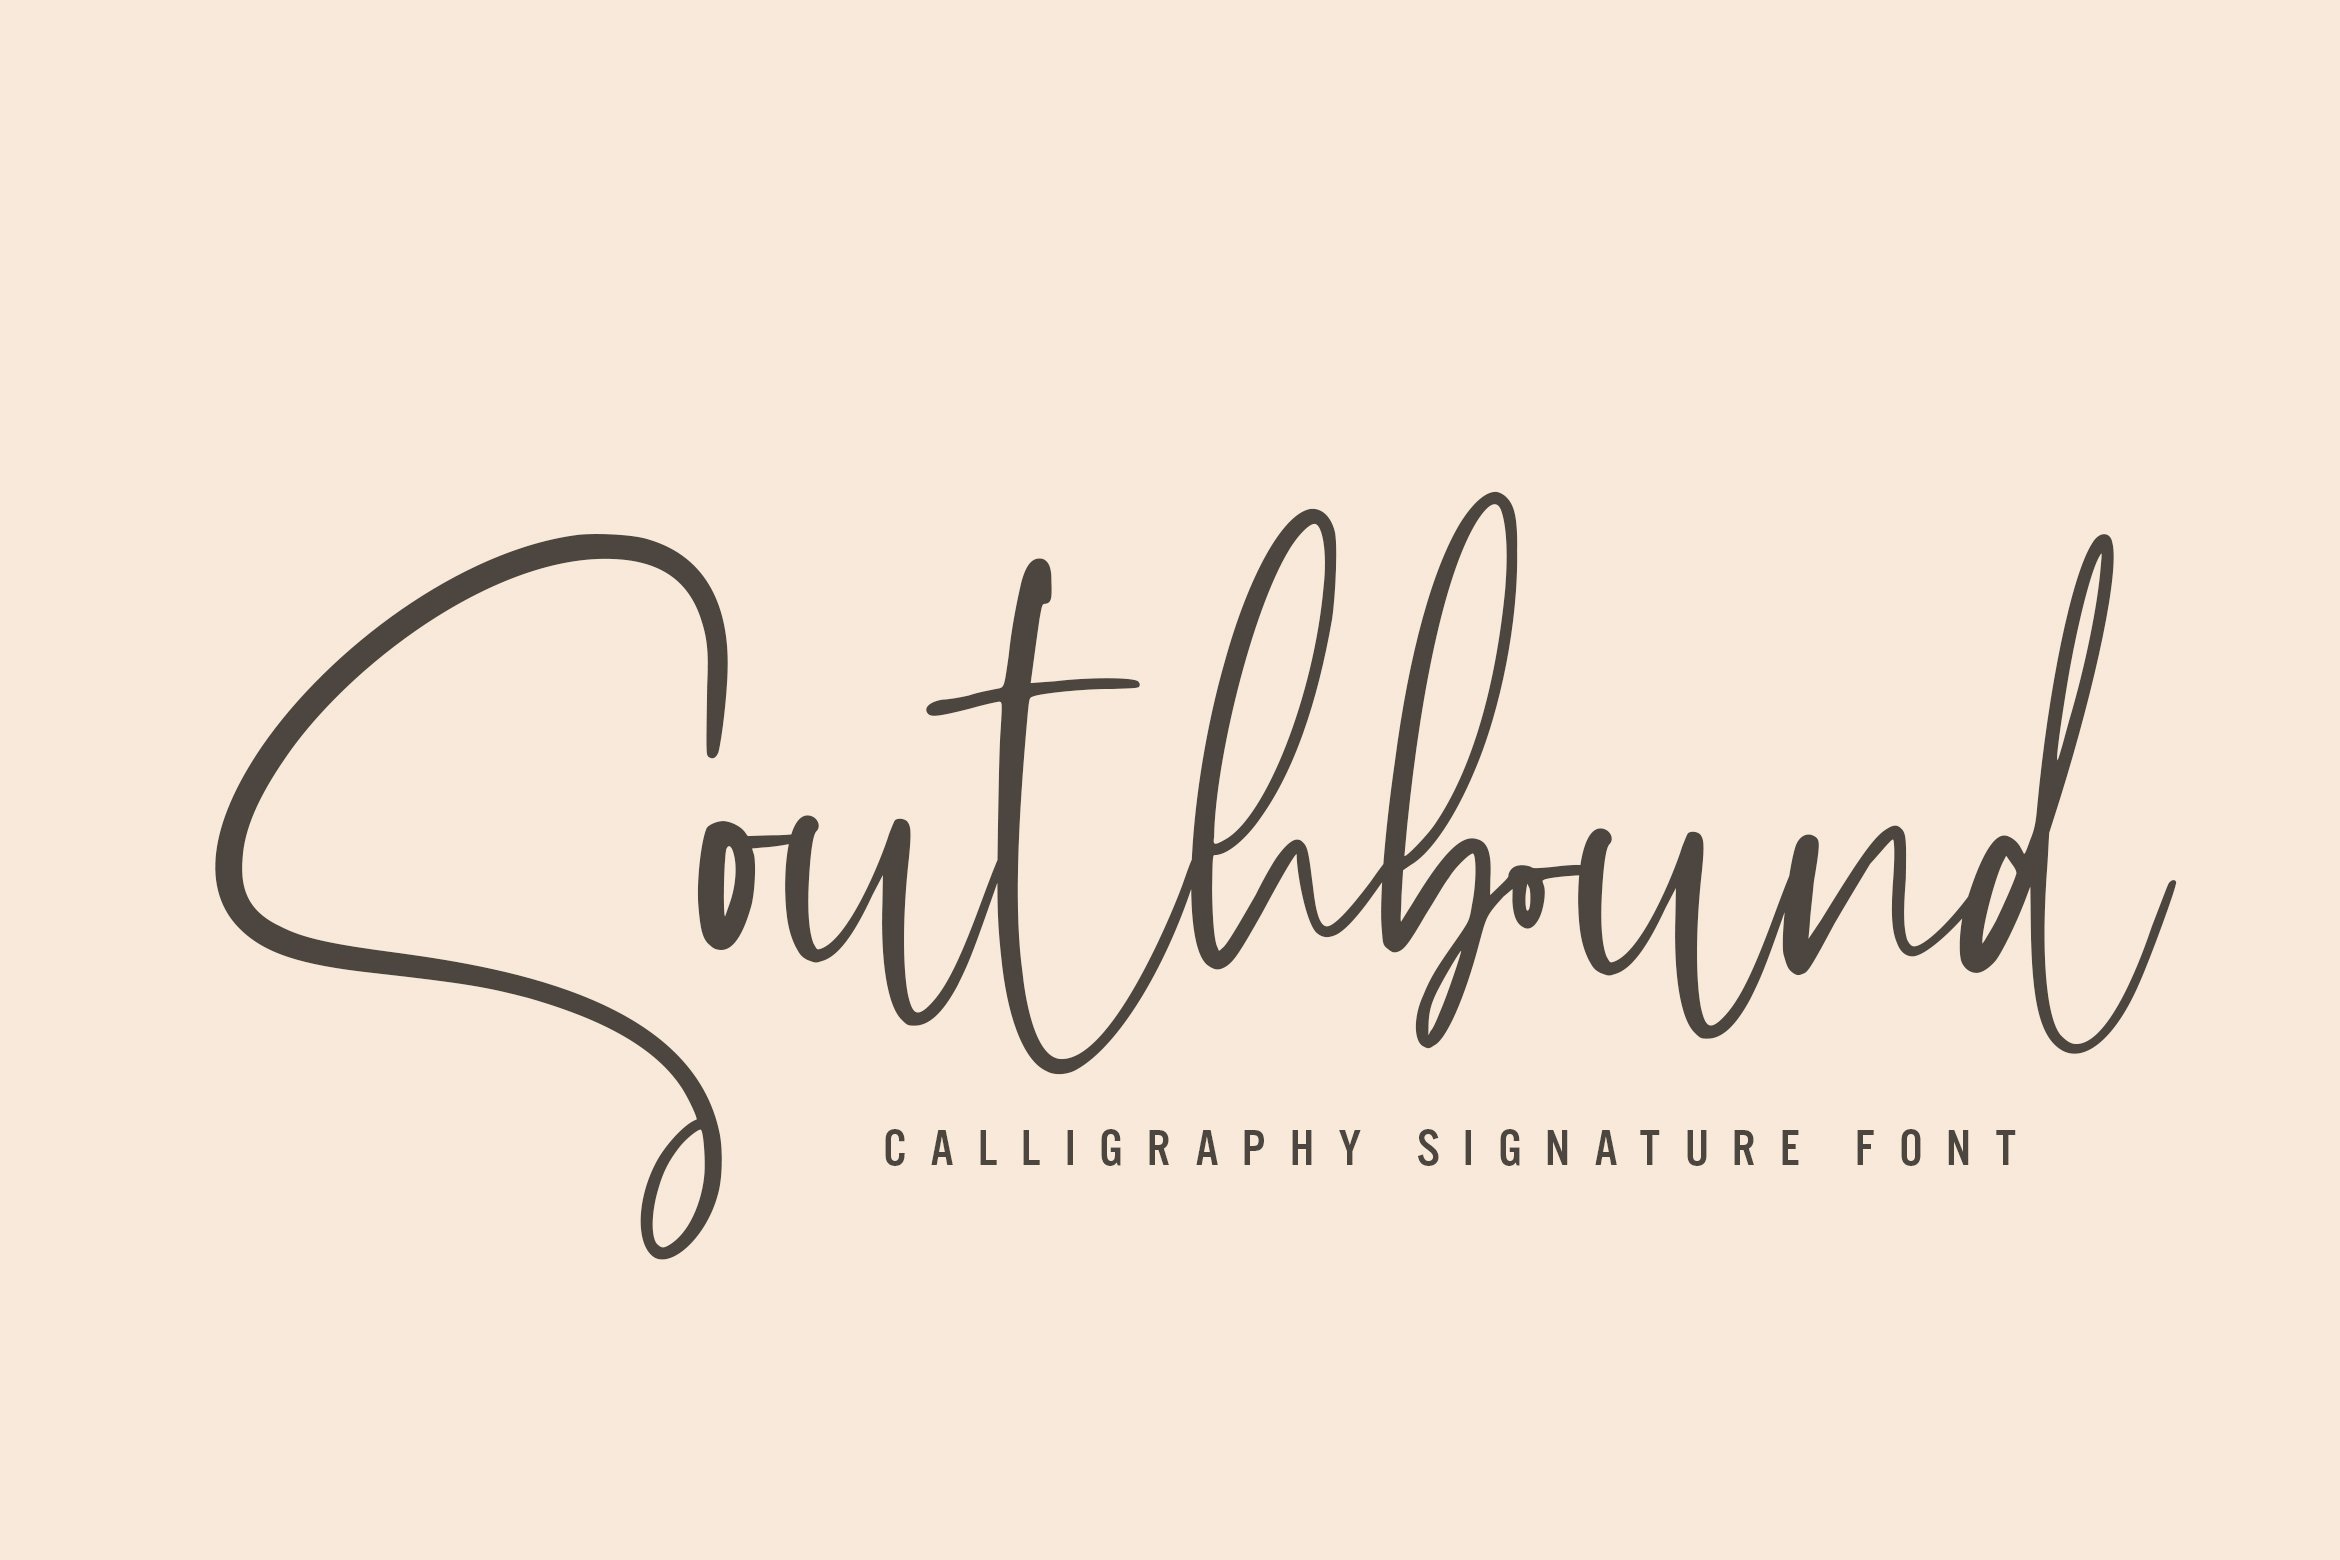 Southbound - Calligraphy Signature cover image.